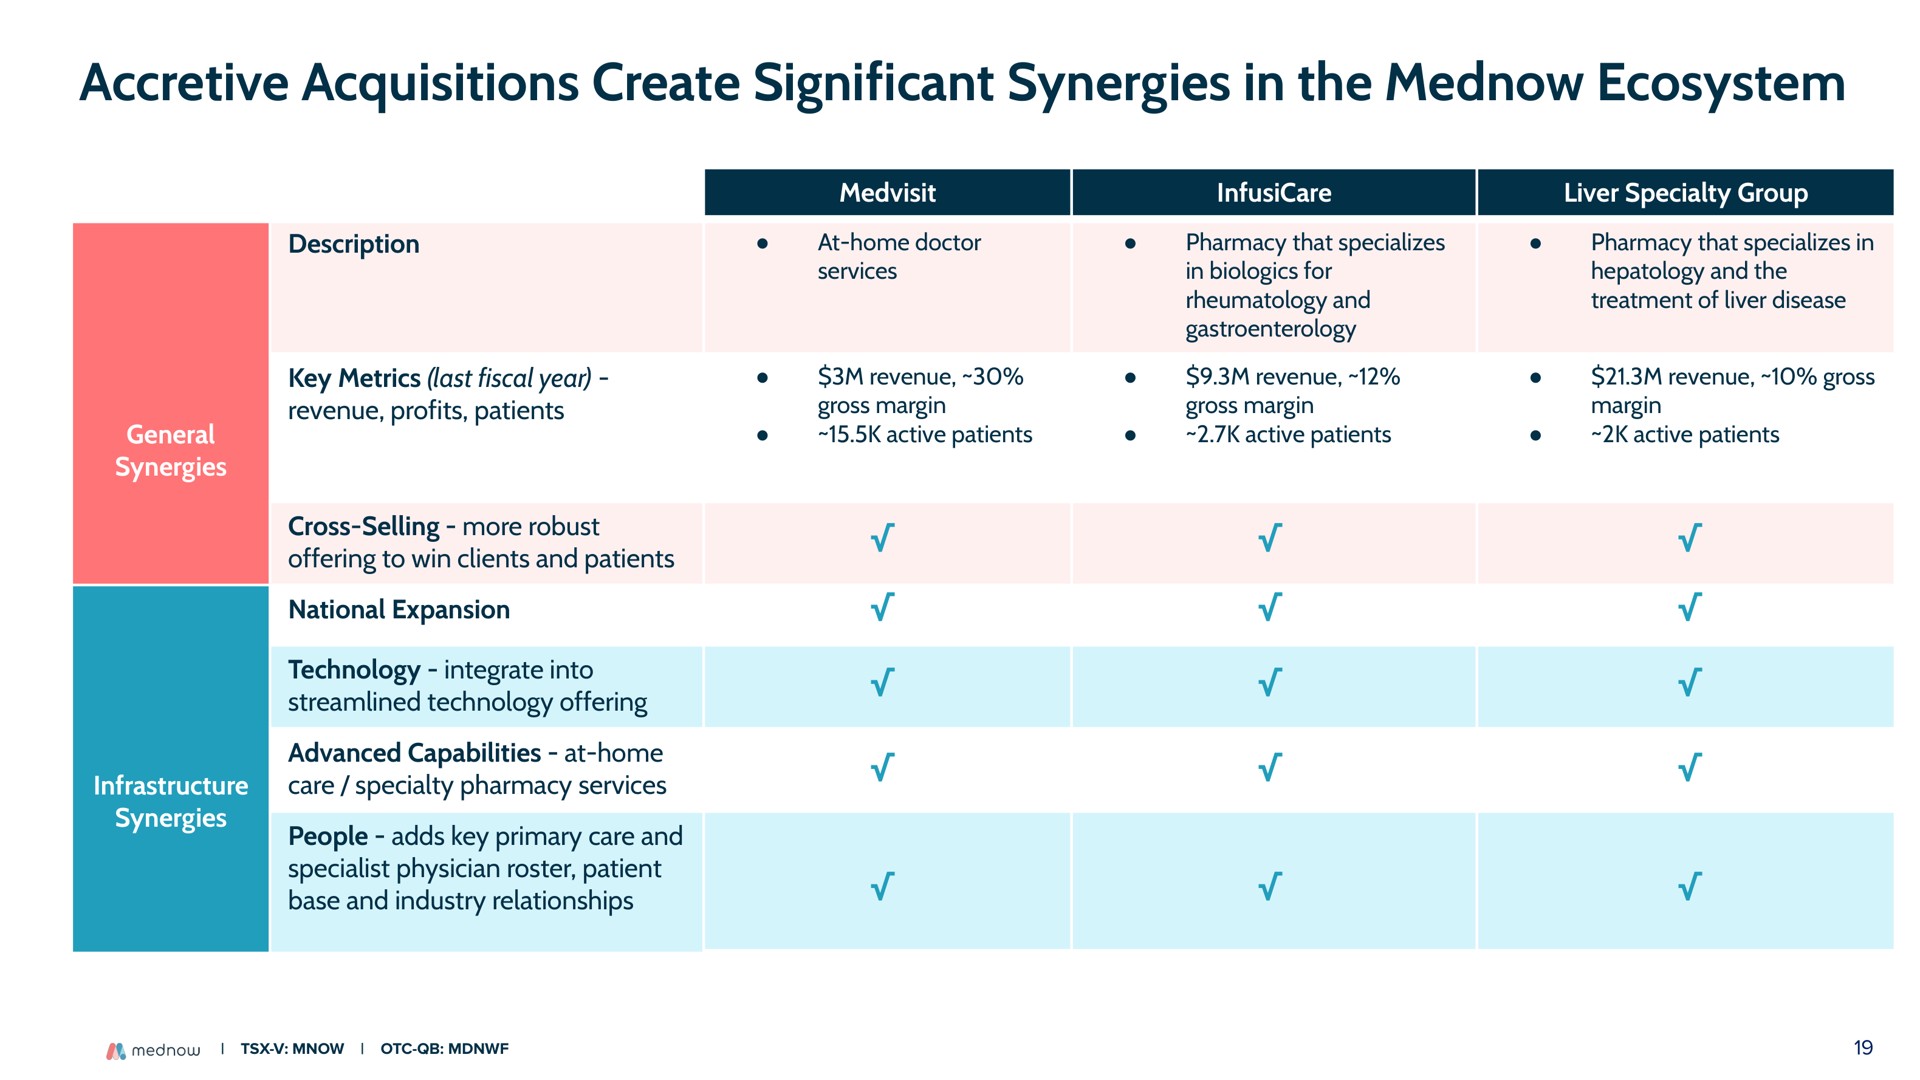 accretive acquisitions create significant synergies in the ecosystem | Mednow